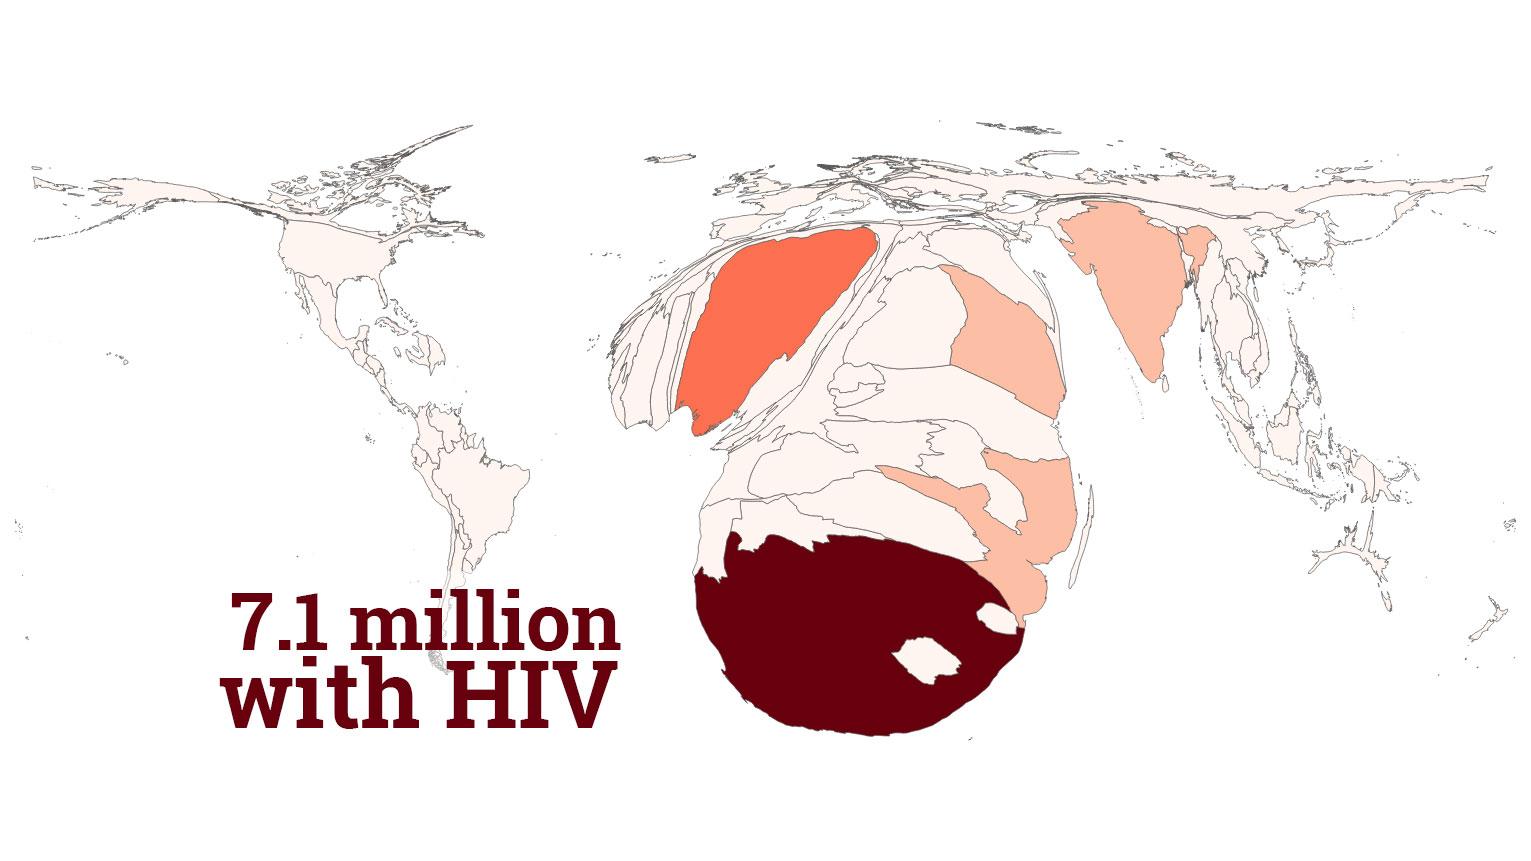 A distorted map is projected based on population living with HIV. In this map, South Africa is the largest country in the world. 